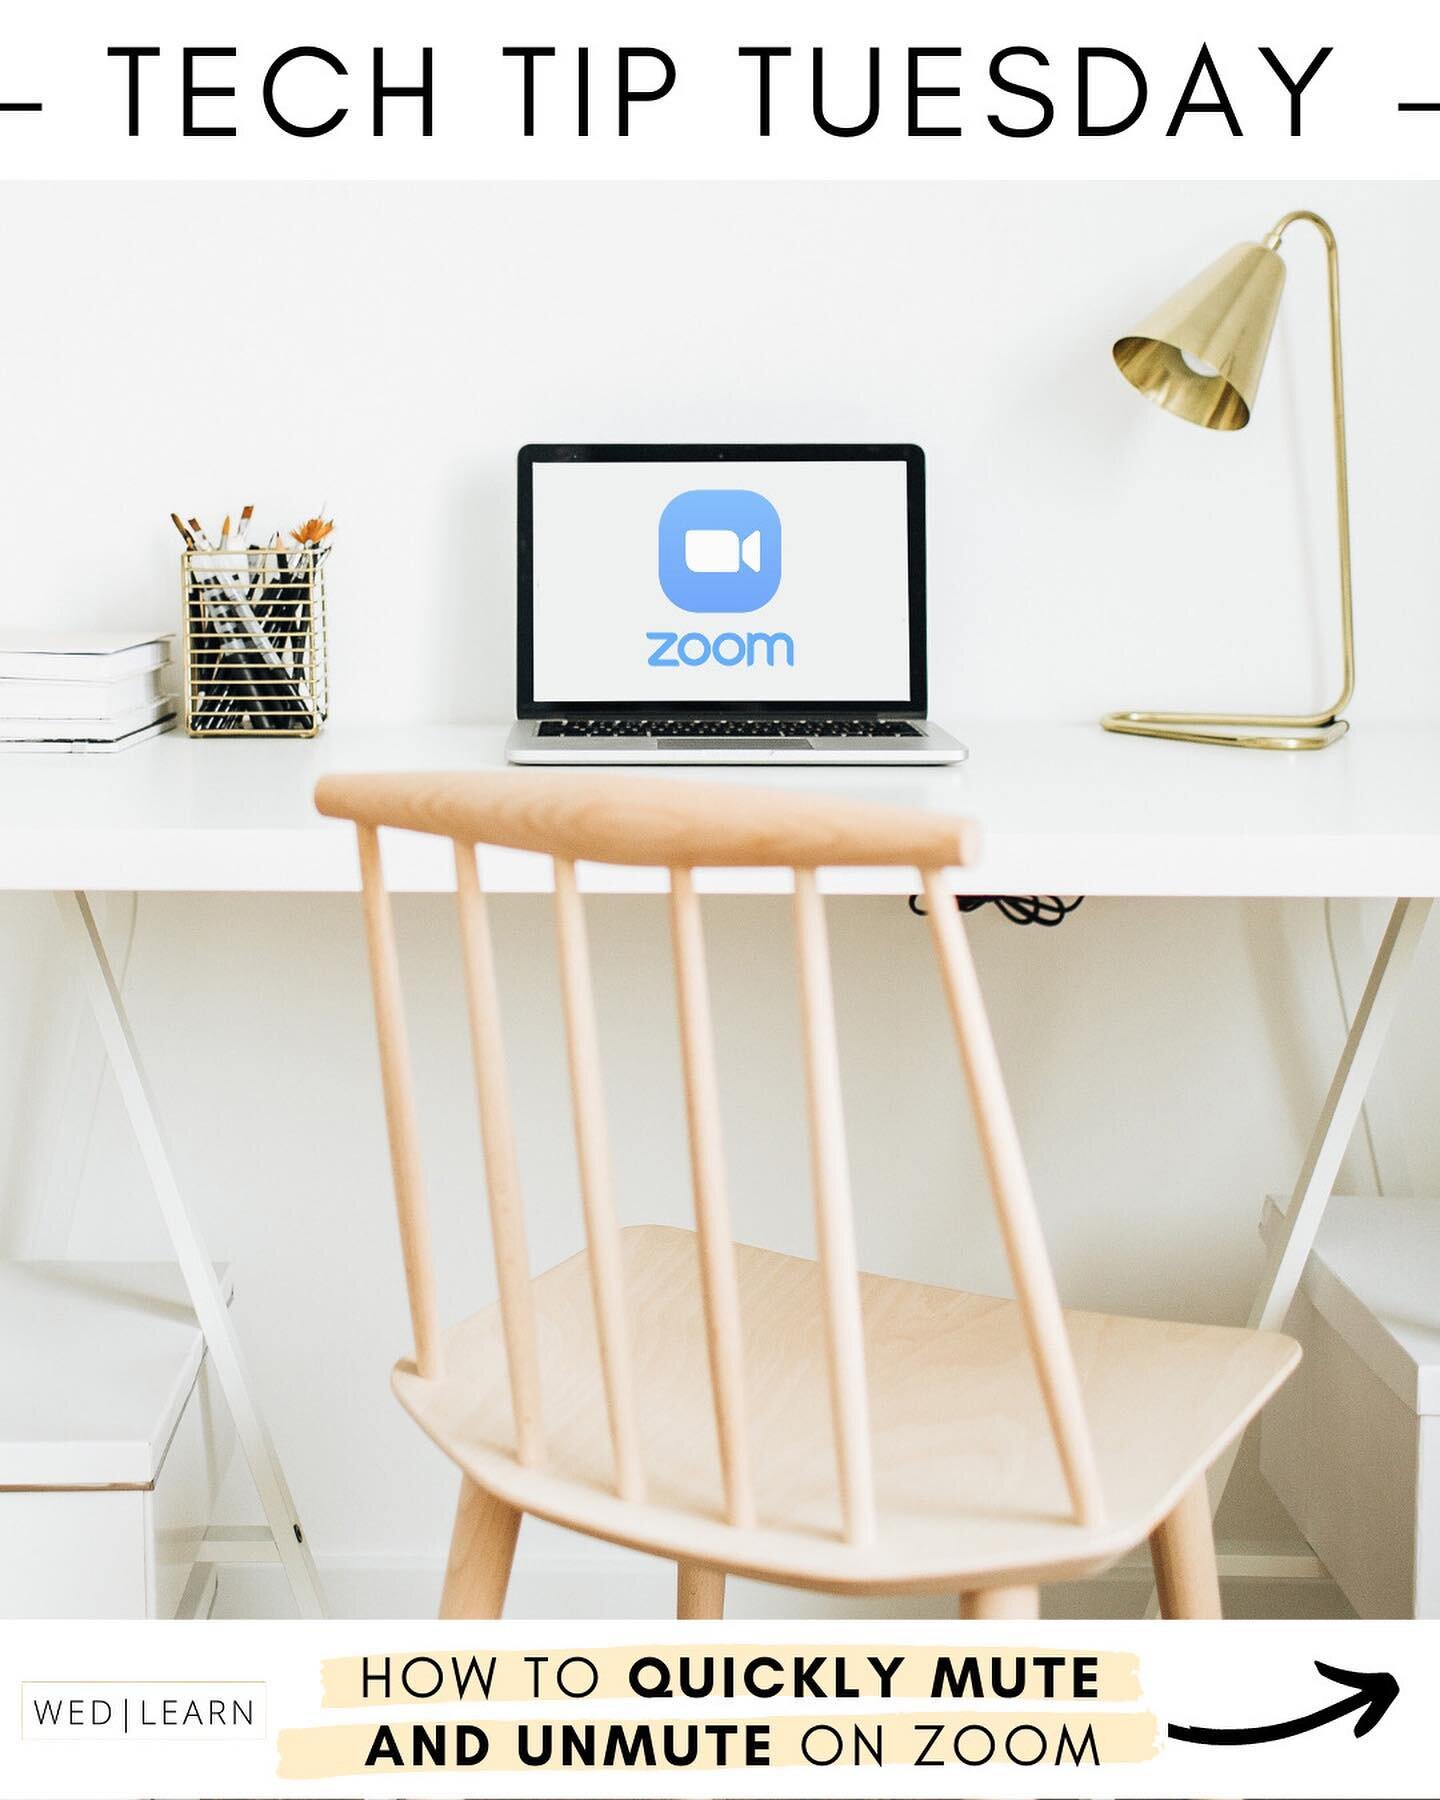 I don't know HOW I just found out about this quick hack, but everyone needs to know this if you use your desktop for Zoom meetings.⁣
⁣
𝐒𝐓𝐄𝐏 𝟏: MUTE yourself (𝘥𝘰𝘯'𝘵 𝘣𝘦 𝘵𝘩𝘢𝘵 𝘱𝘦𝘳𝘴𝘰𝘯)⁣
𝐒𝐓𝐄𝐏 𝟐: When you need to speak up, 𝘏𝘖𝘓𝘋